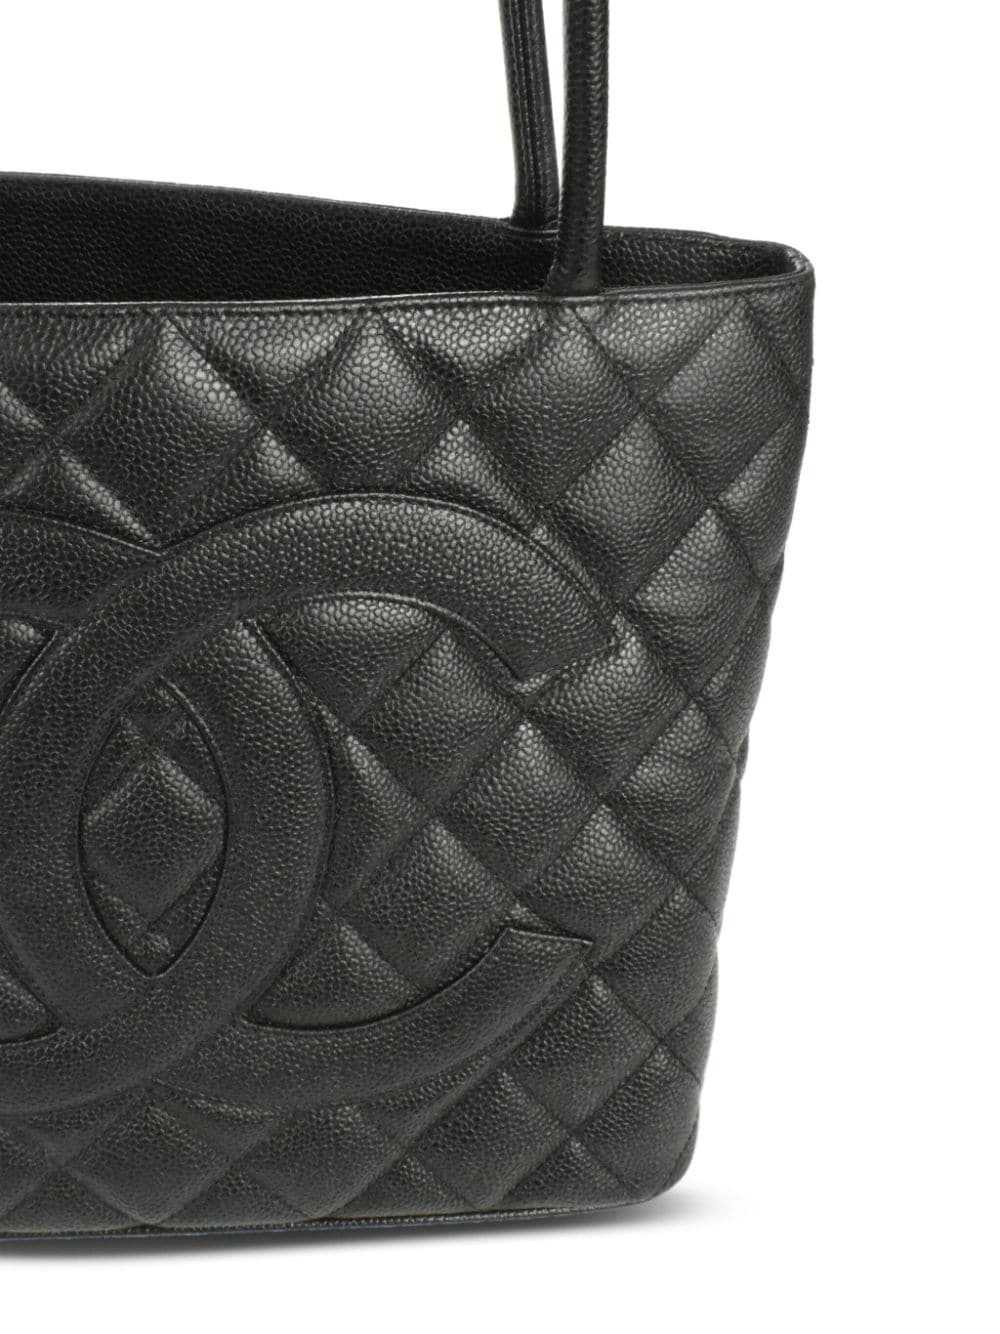 CHANEL Pre-Owned 2000 Medallion leather tote bag … - image 4